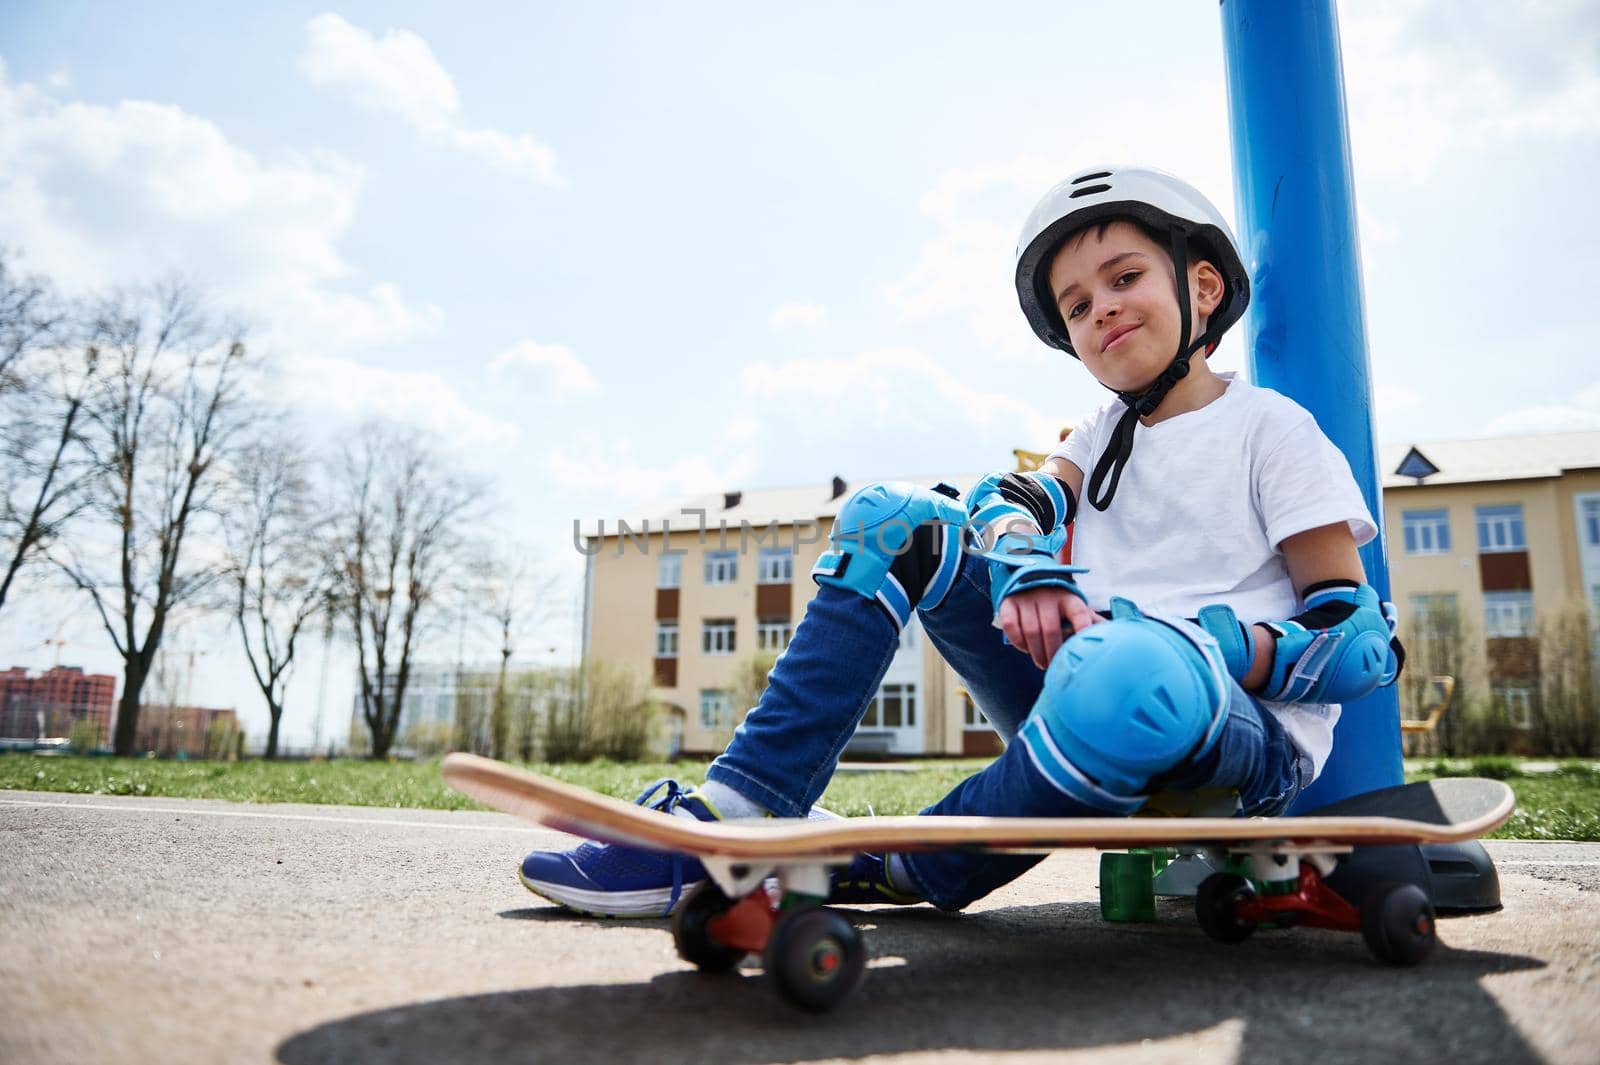 Bottom view of smiling boy in protective gear of skateboarder sitting on skateboard and looking at camera against the background of a yellow building